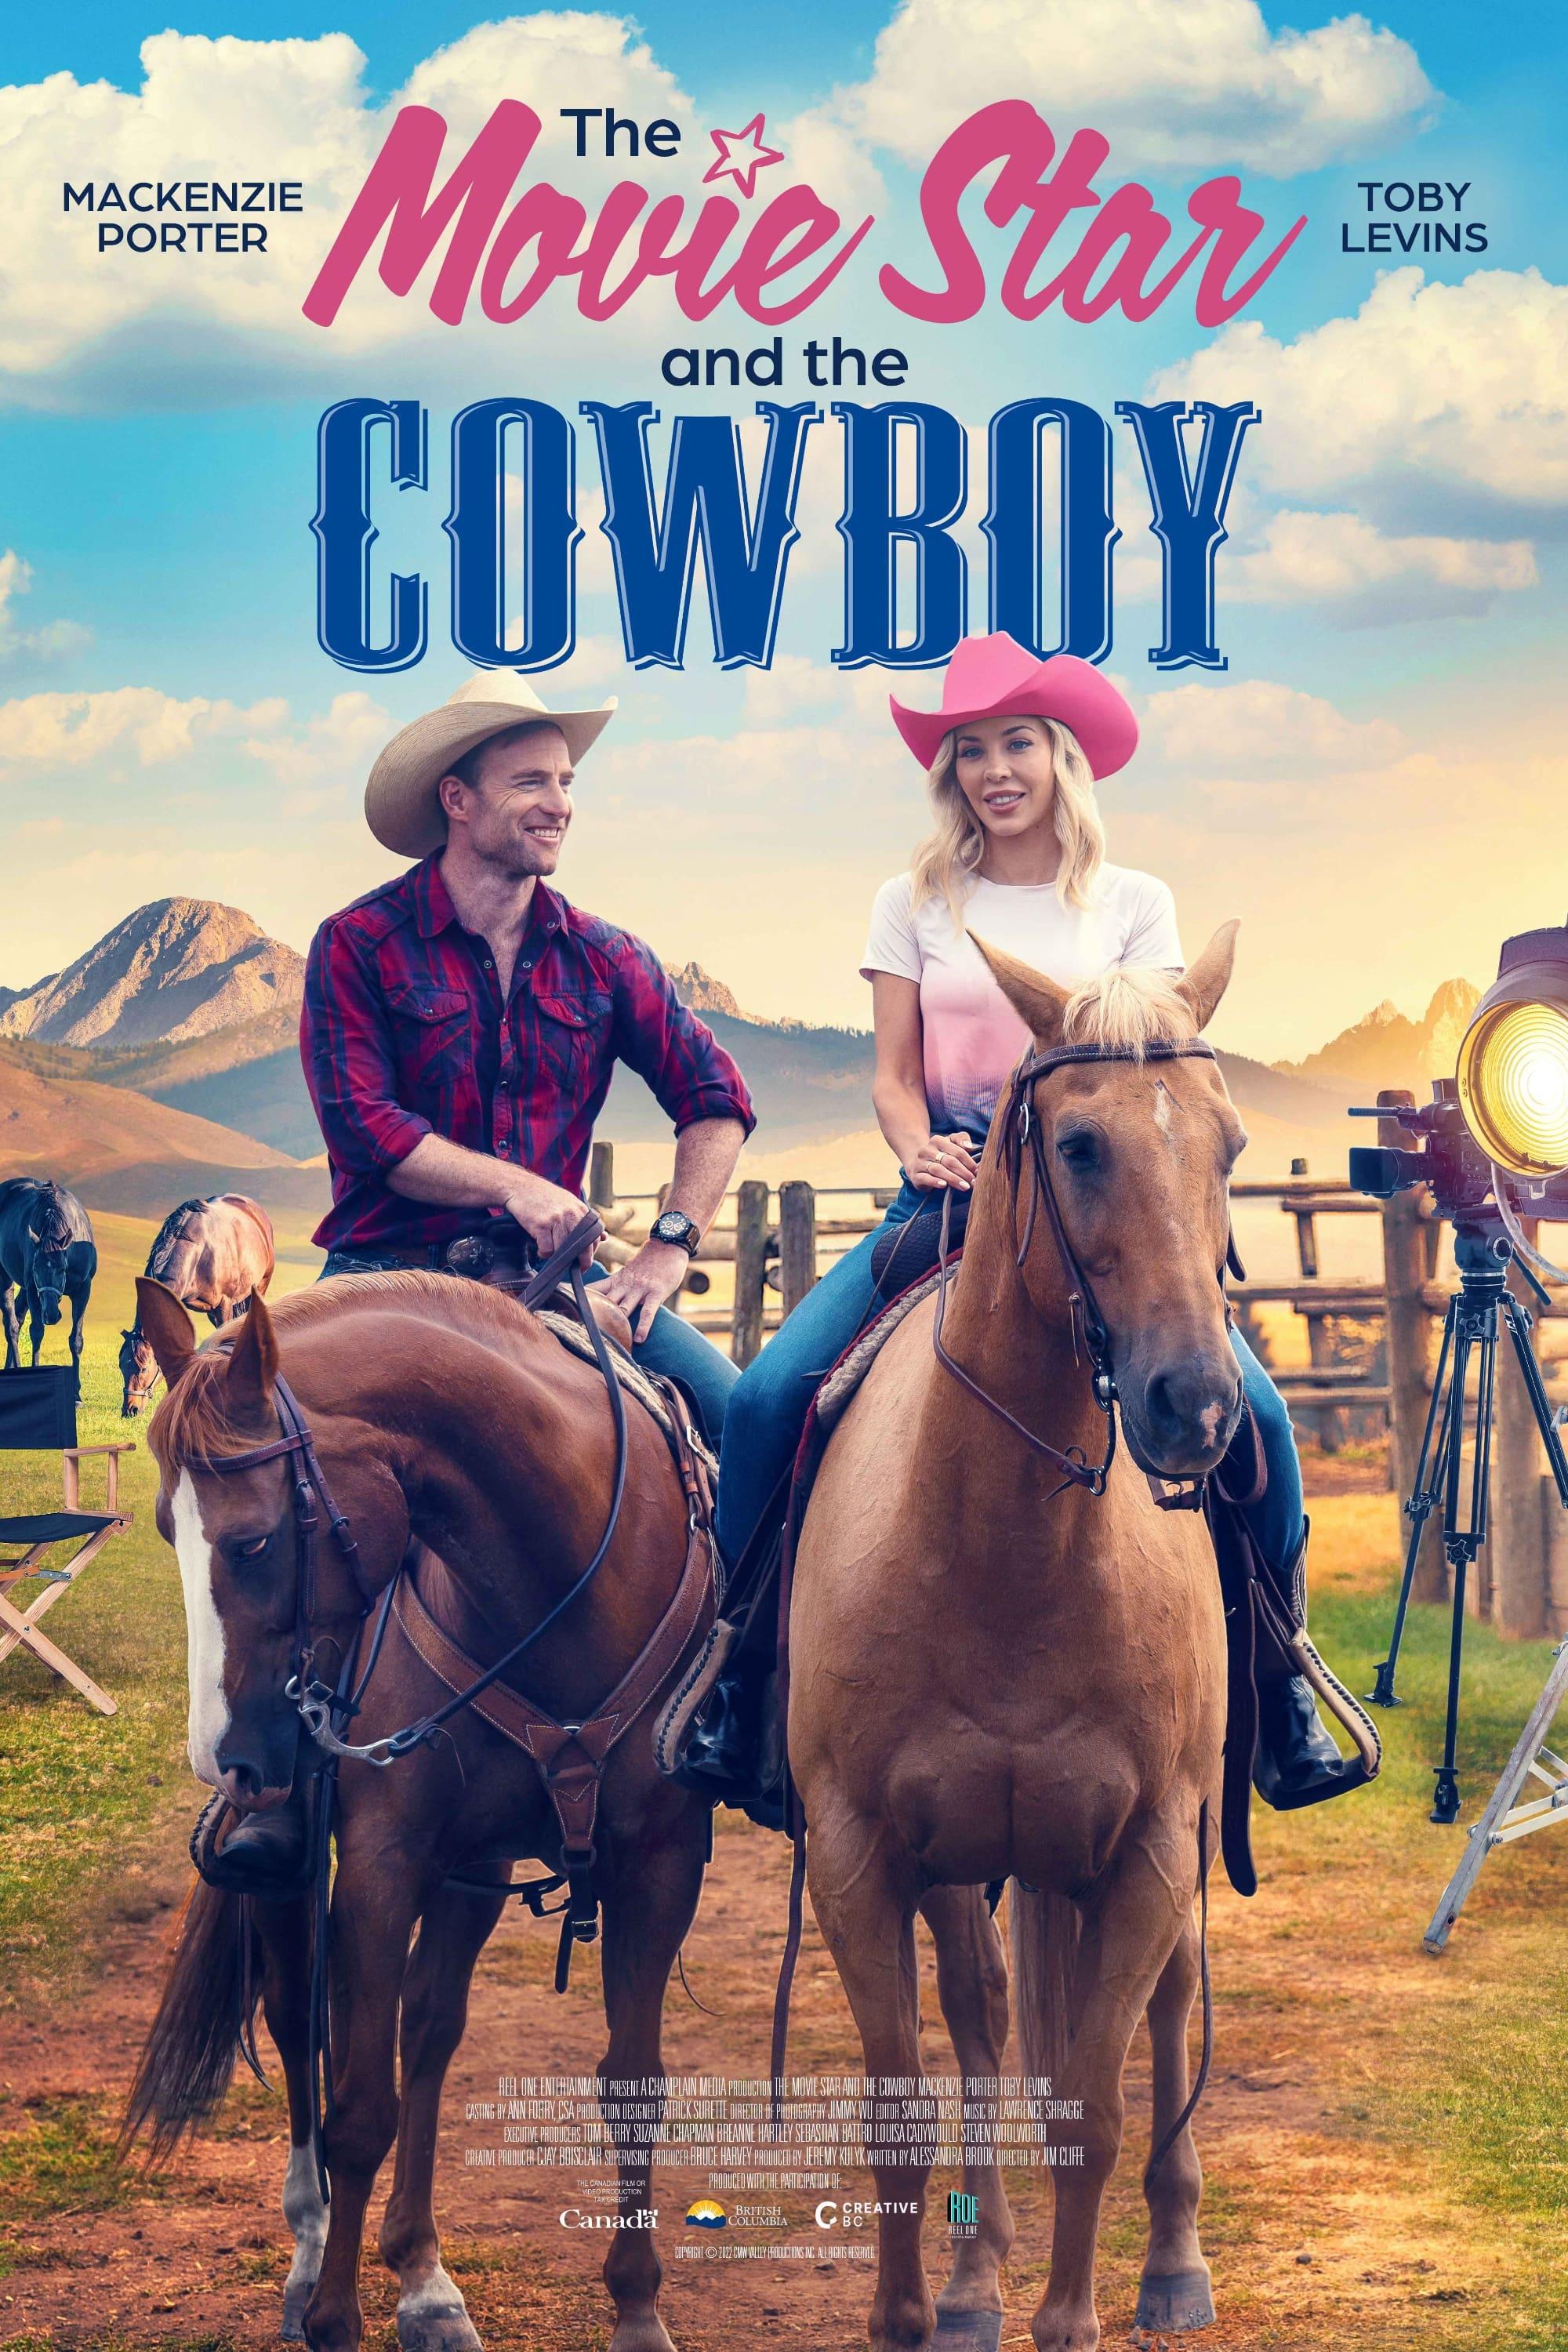 The Movie Star and the Cowboy poster